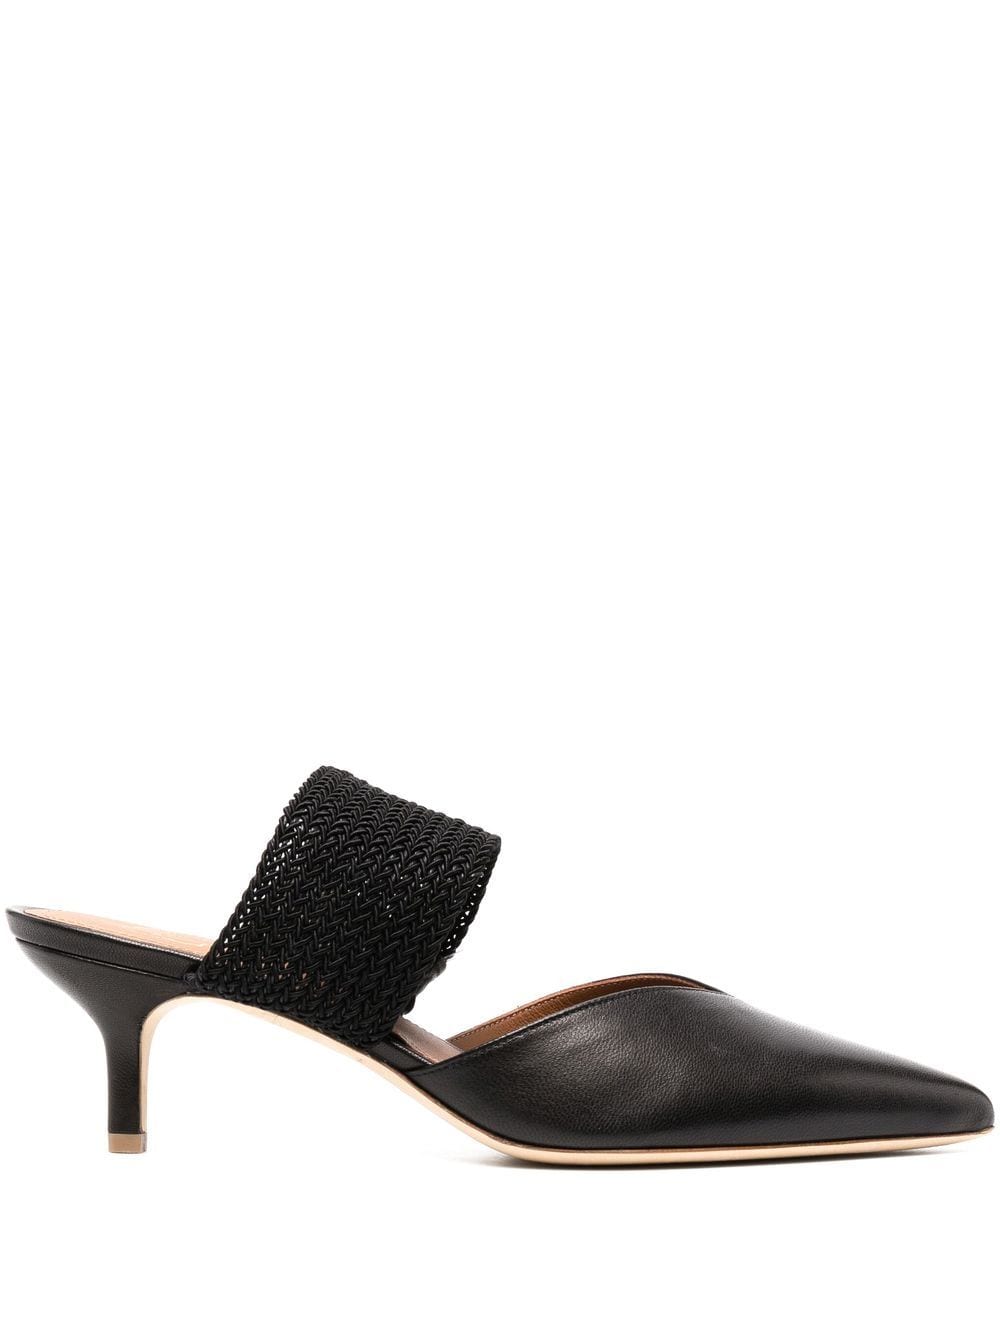 Malone Souliers Maisie 60mm leather pump - Black von Malone Souliers